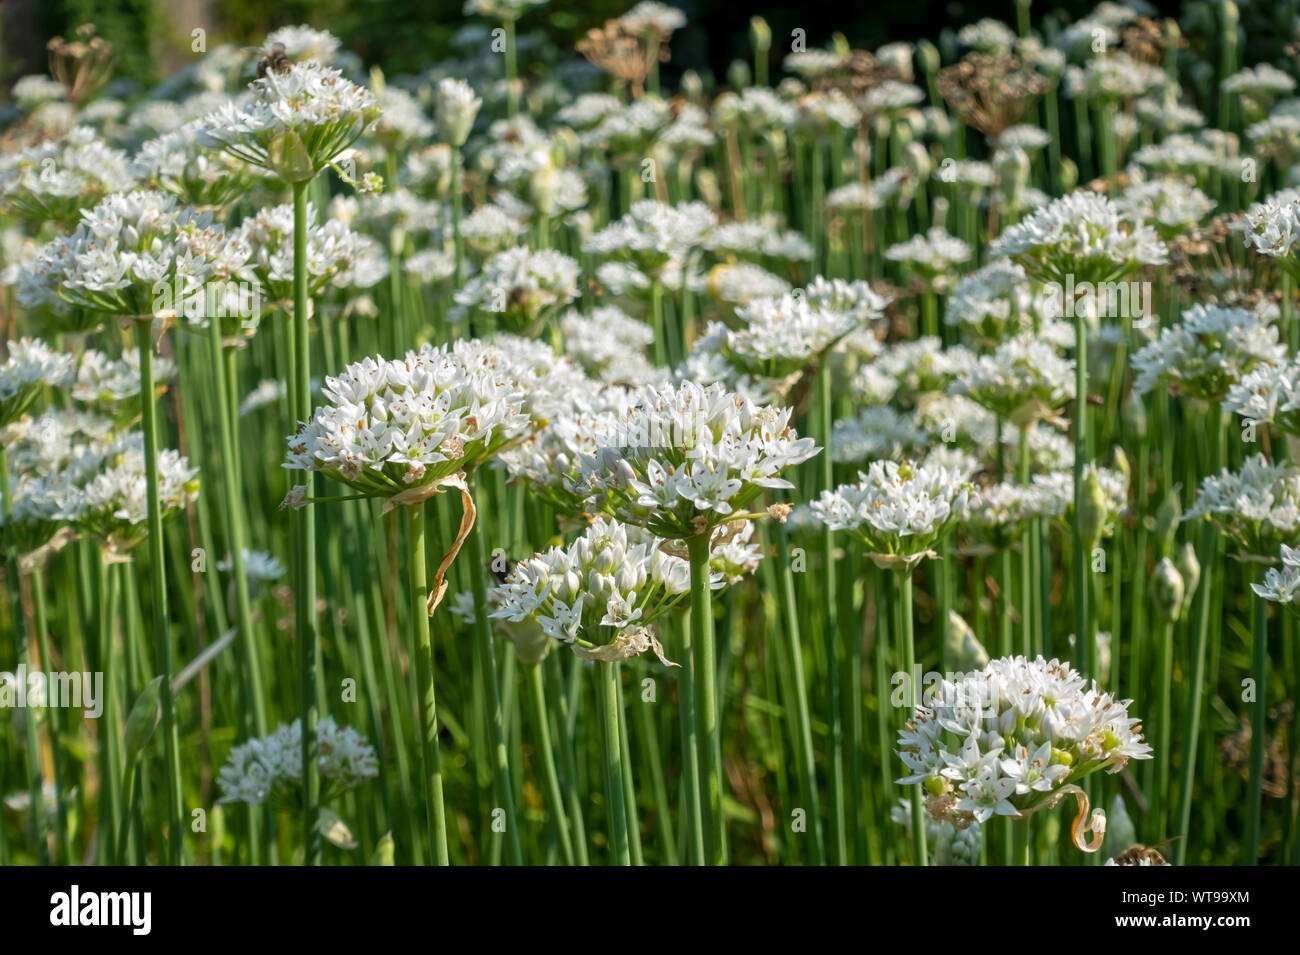 Close up of Oriental garlic white flowers flowering flowers plant growing in a garden in summer England UK United Kingdom GB Great Britain Stock Photo